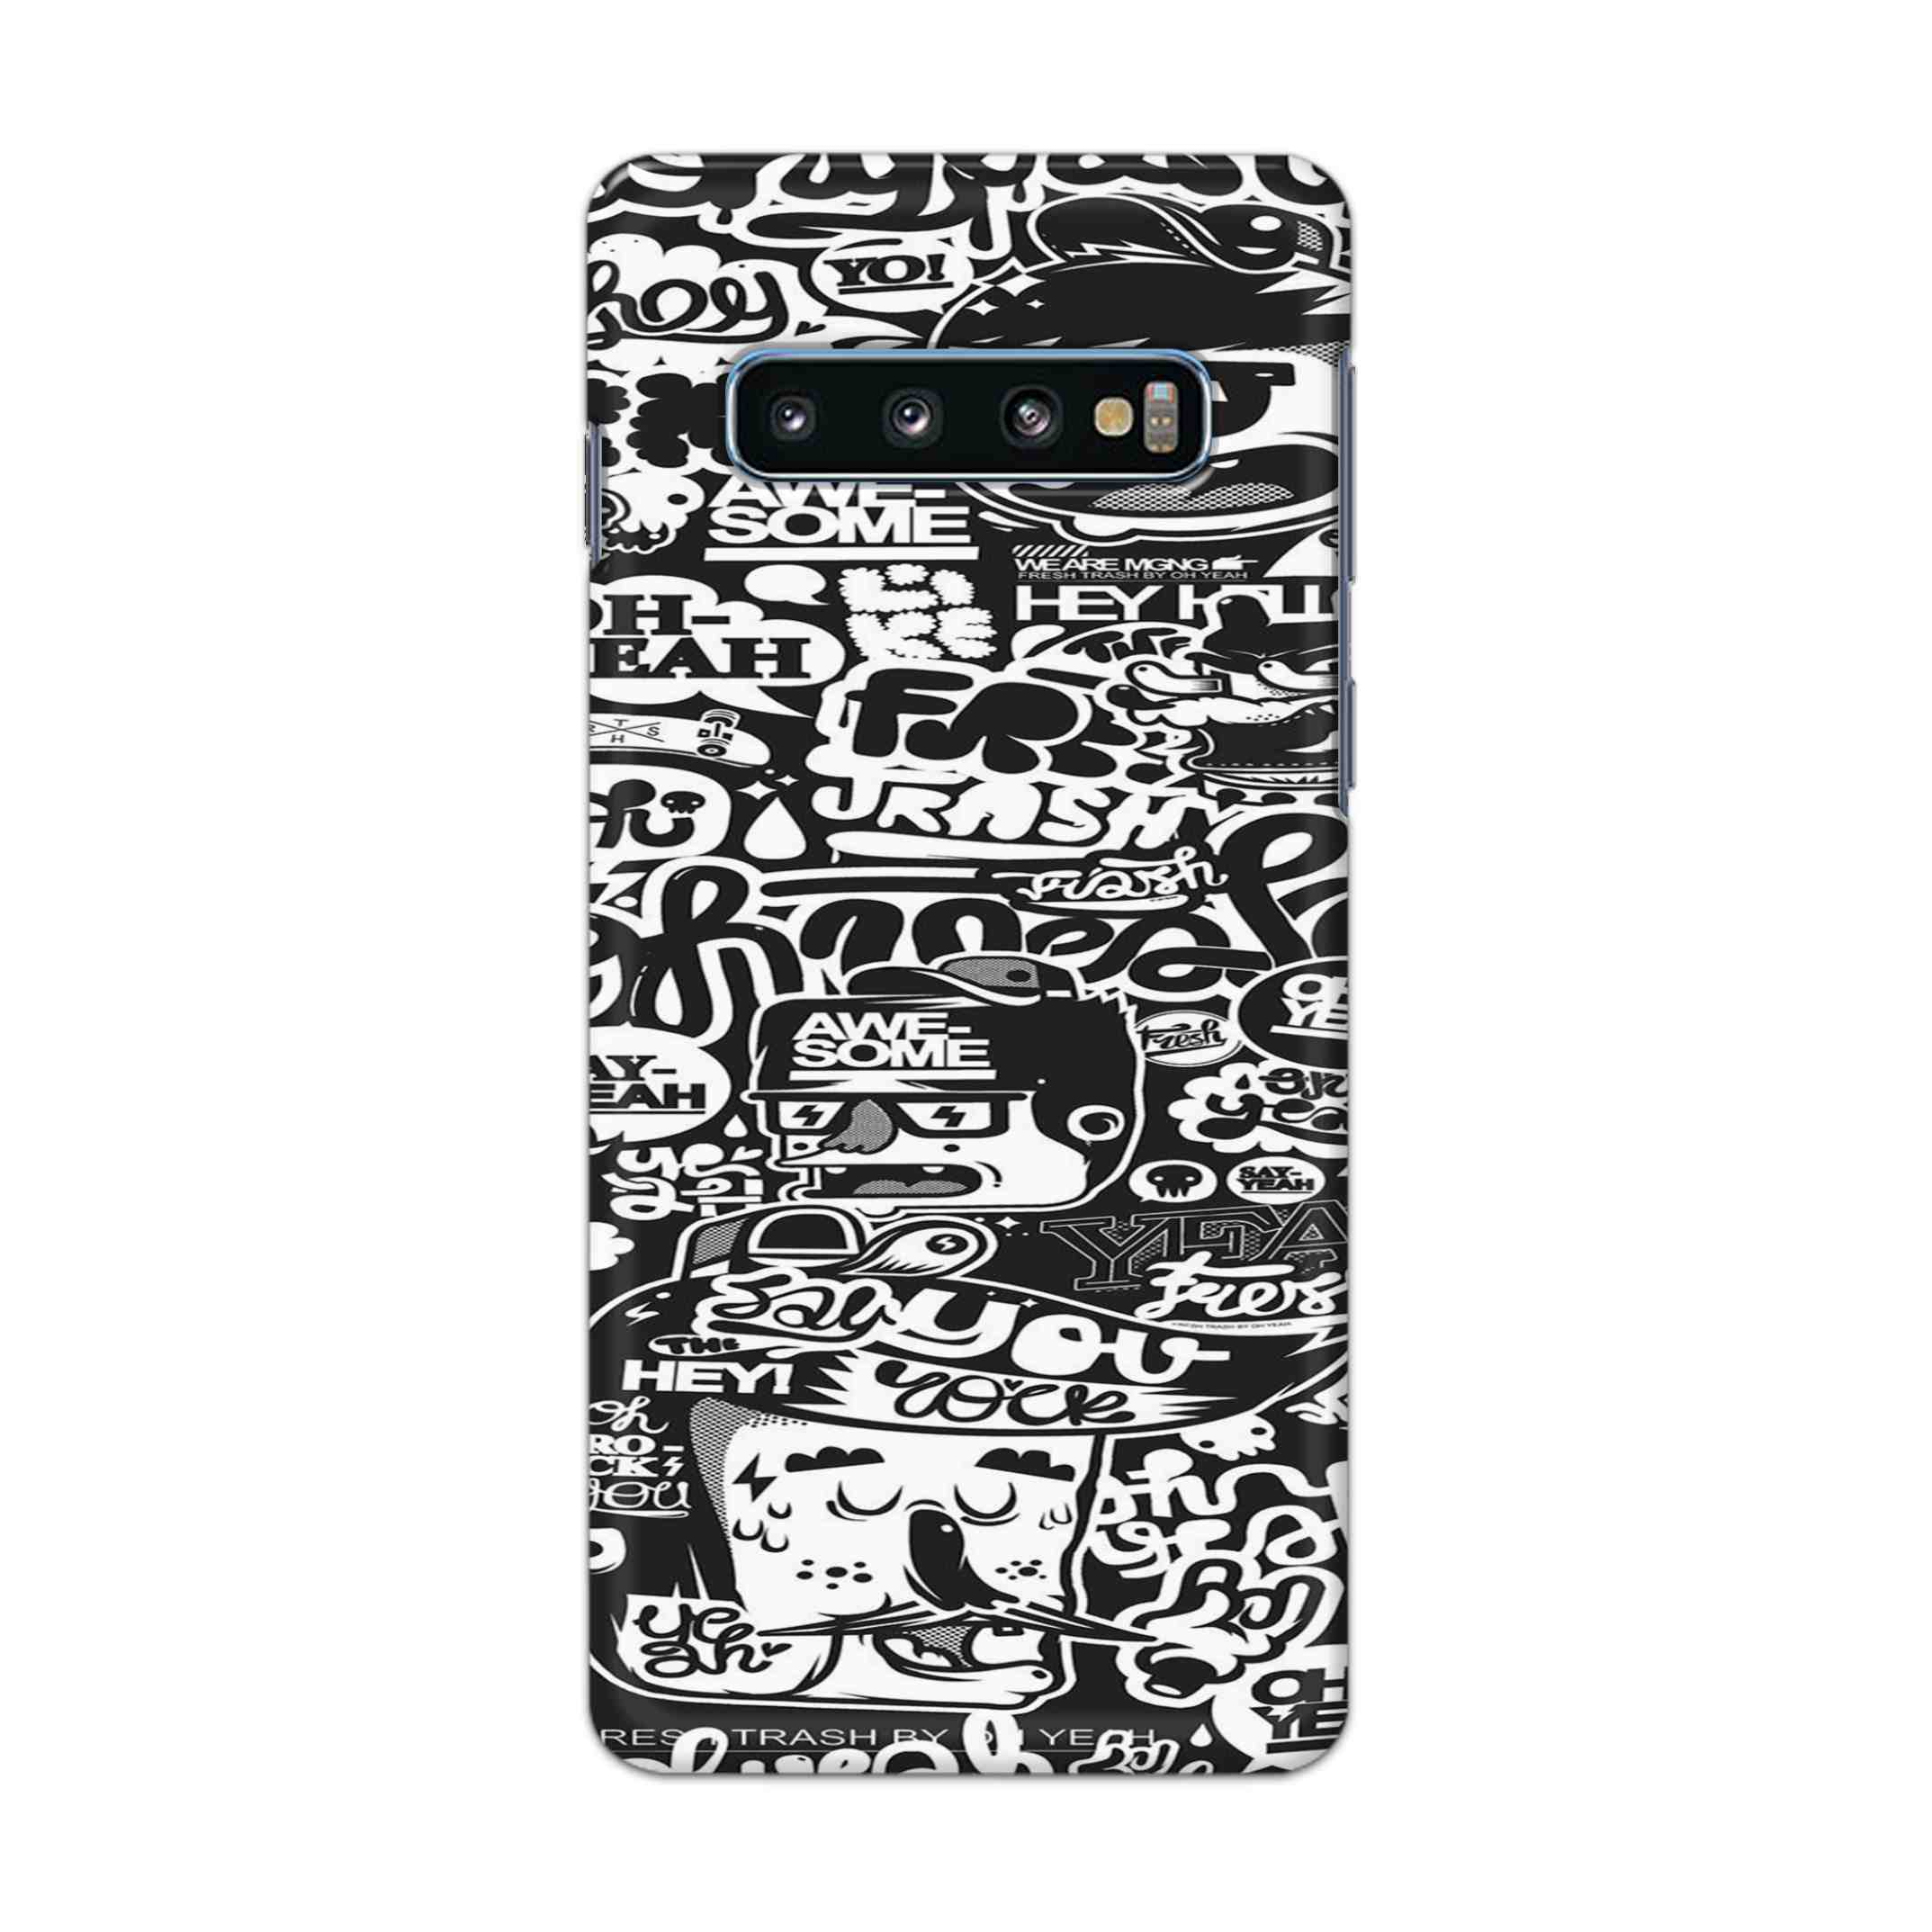 Buy Awesome Hard Back Mobile Phone Case Cover For Samsung Galaxy S10 Plus Online